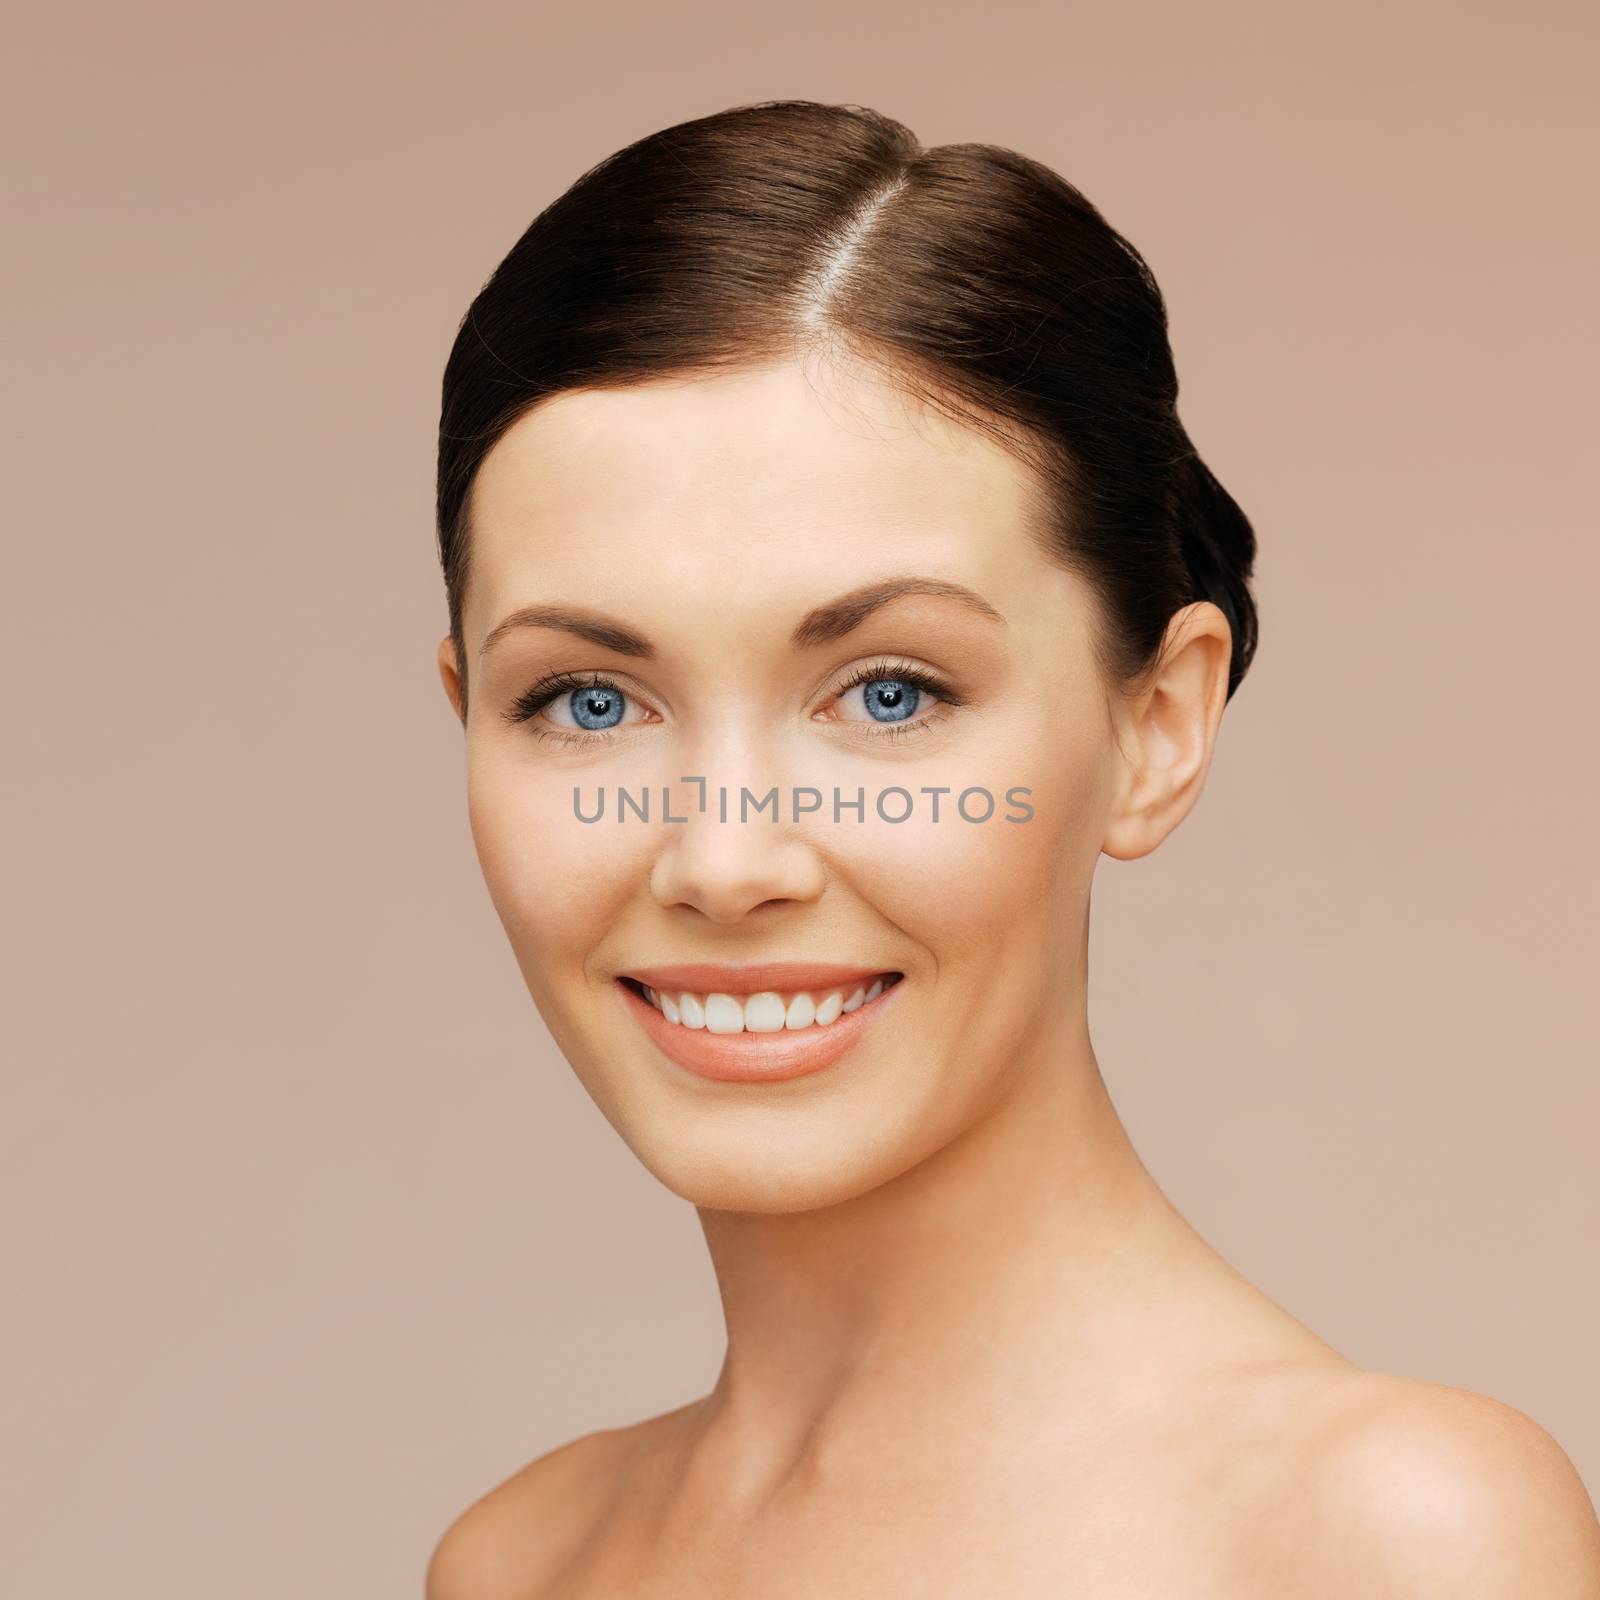 healthcare, spa and beauty concept - face of beautiful woman